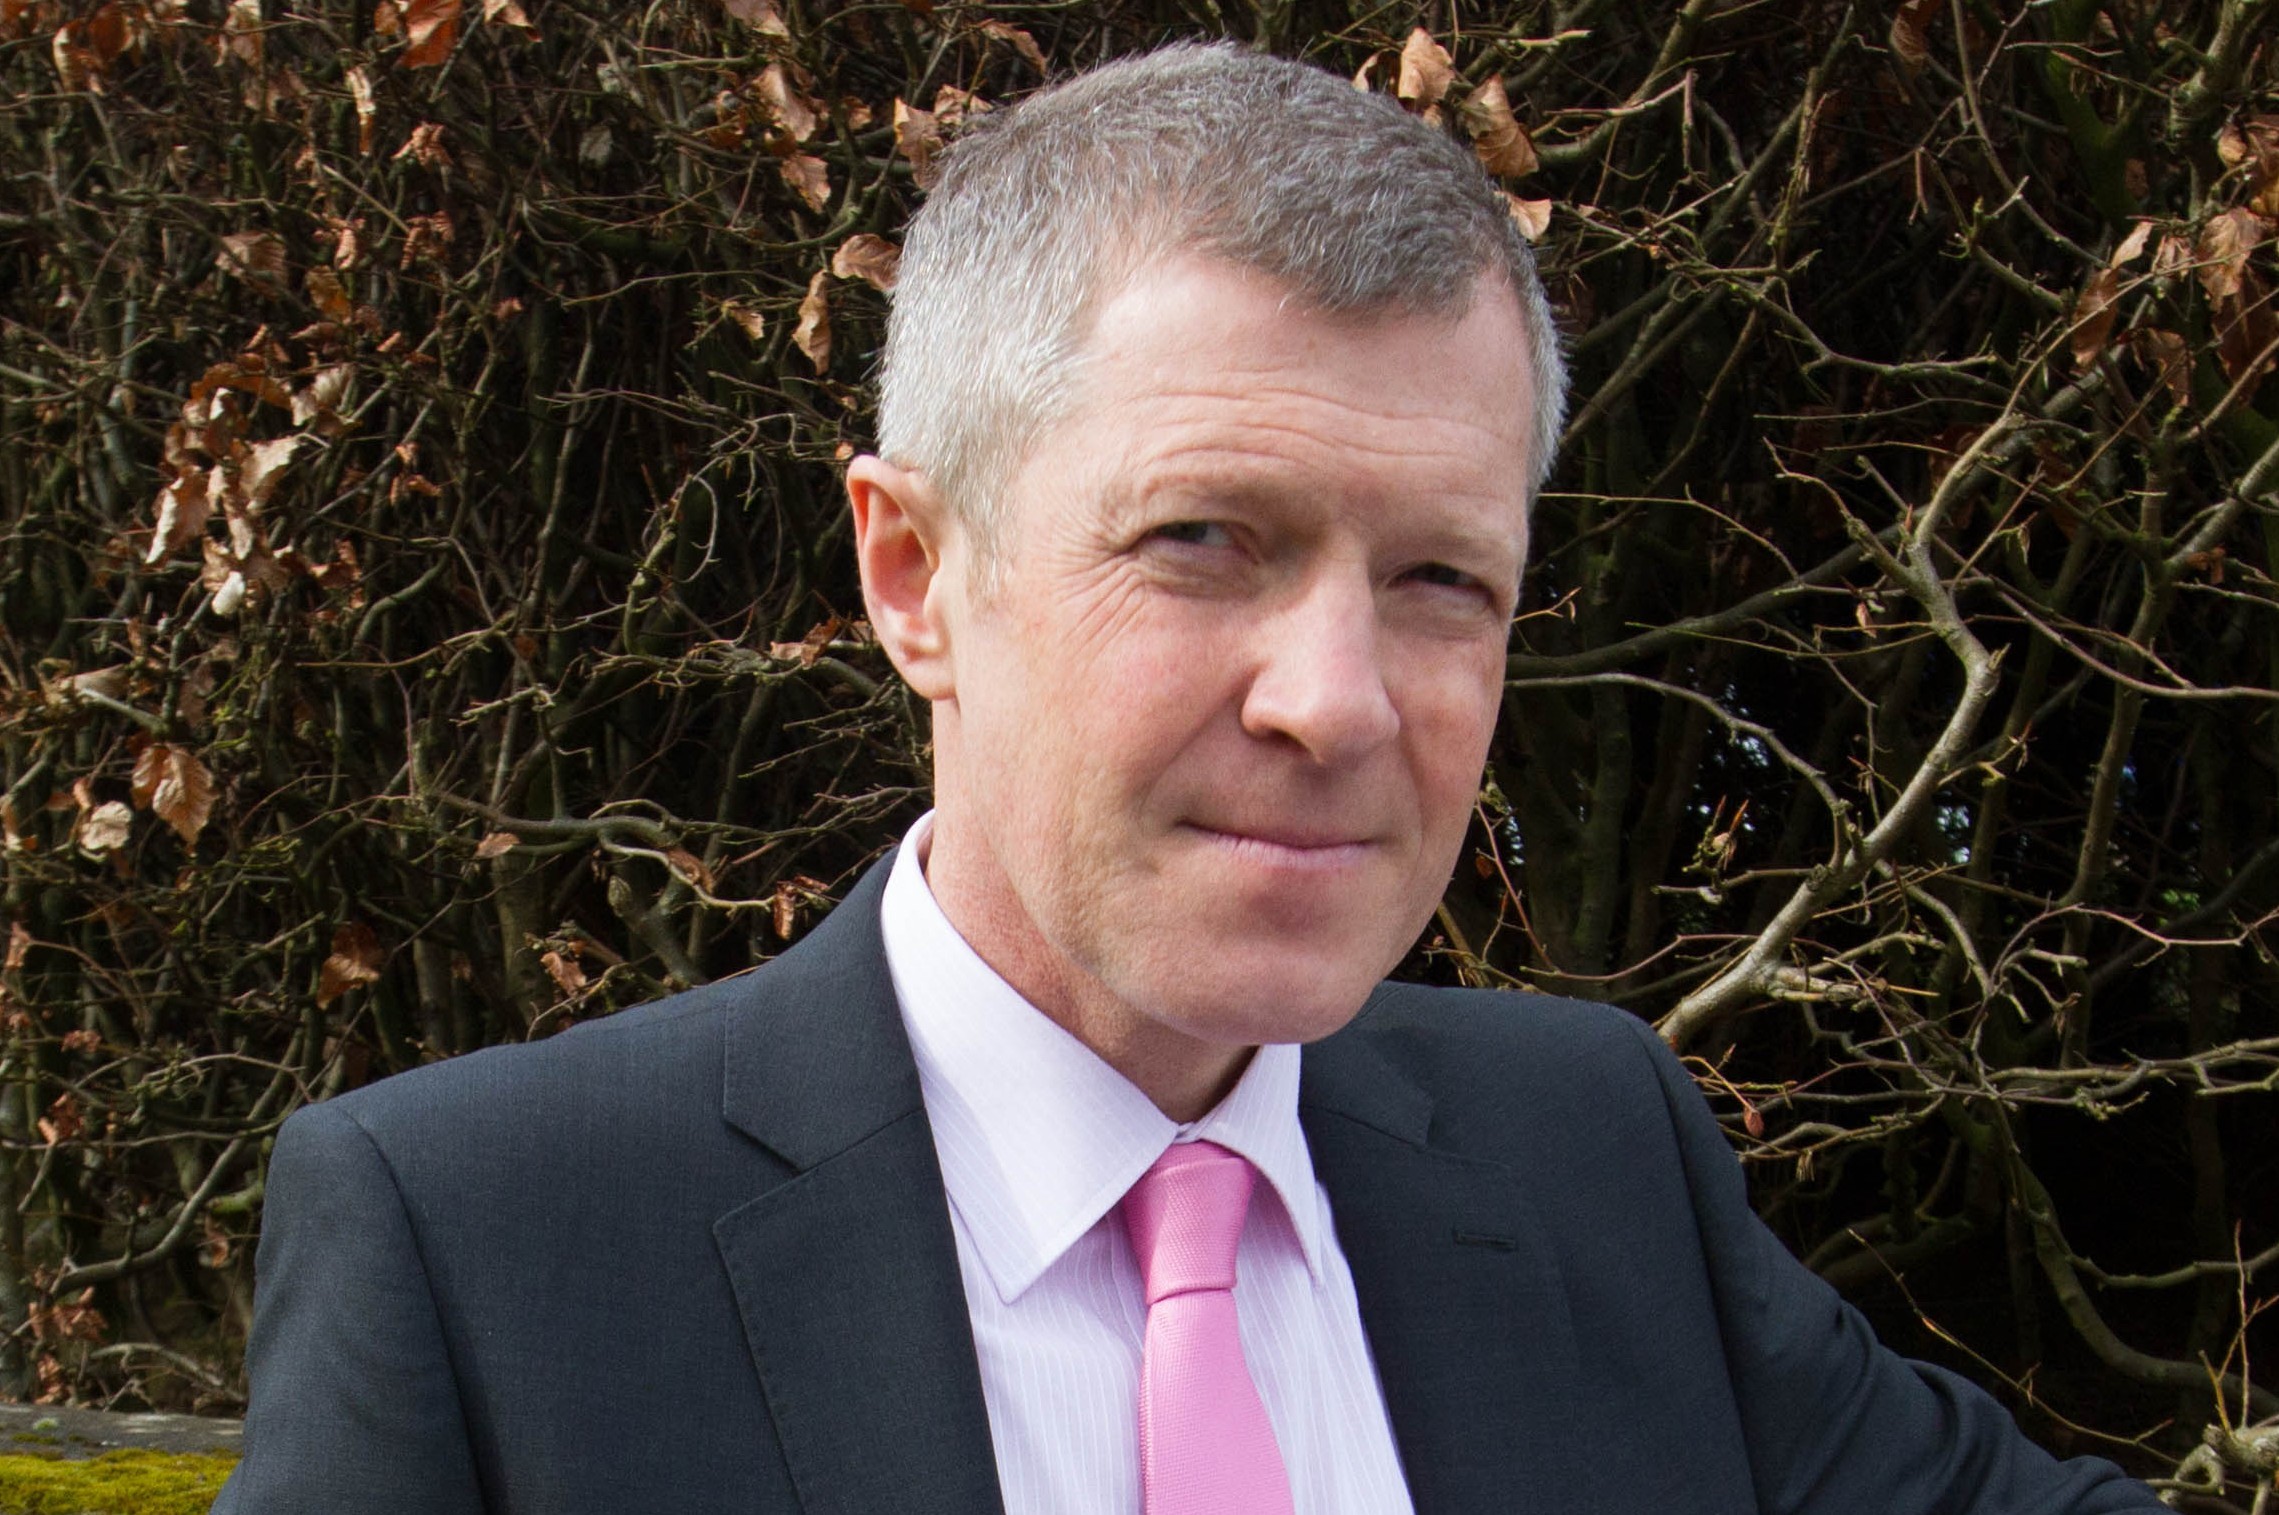 Willie Rennie has said Liberal Democrat councillors can make deals with other parties where in the best interests of their local areas.